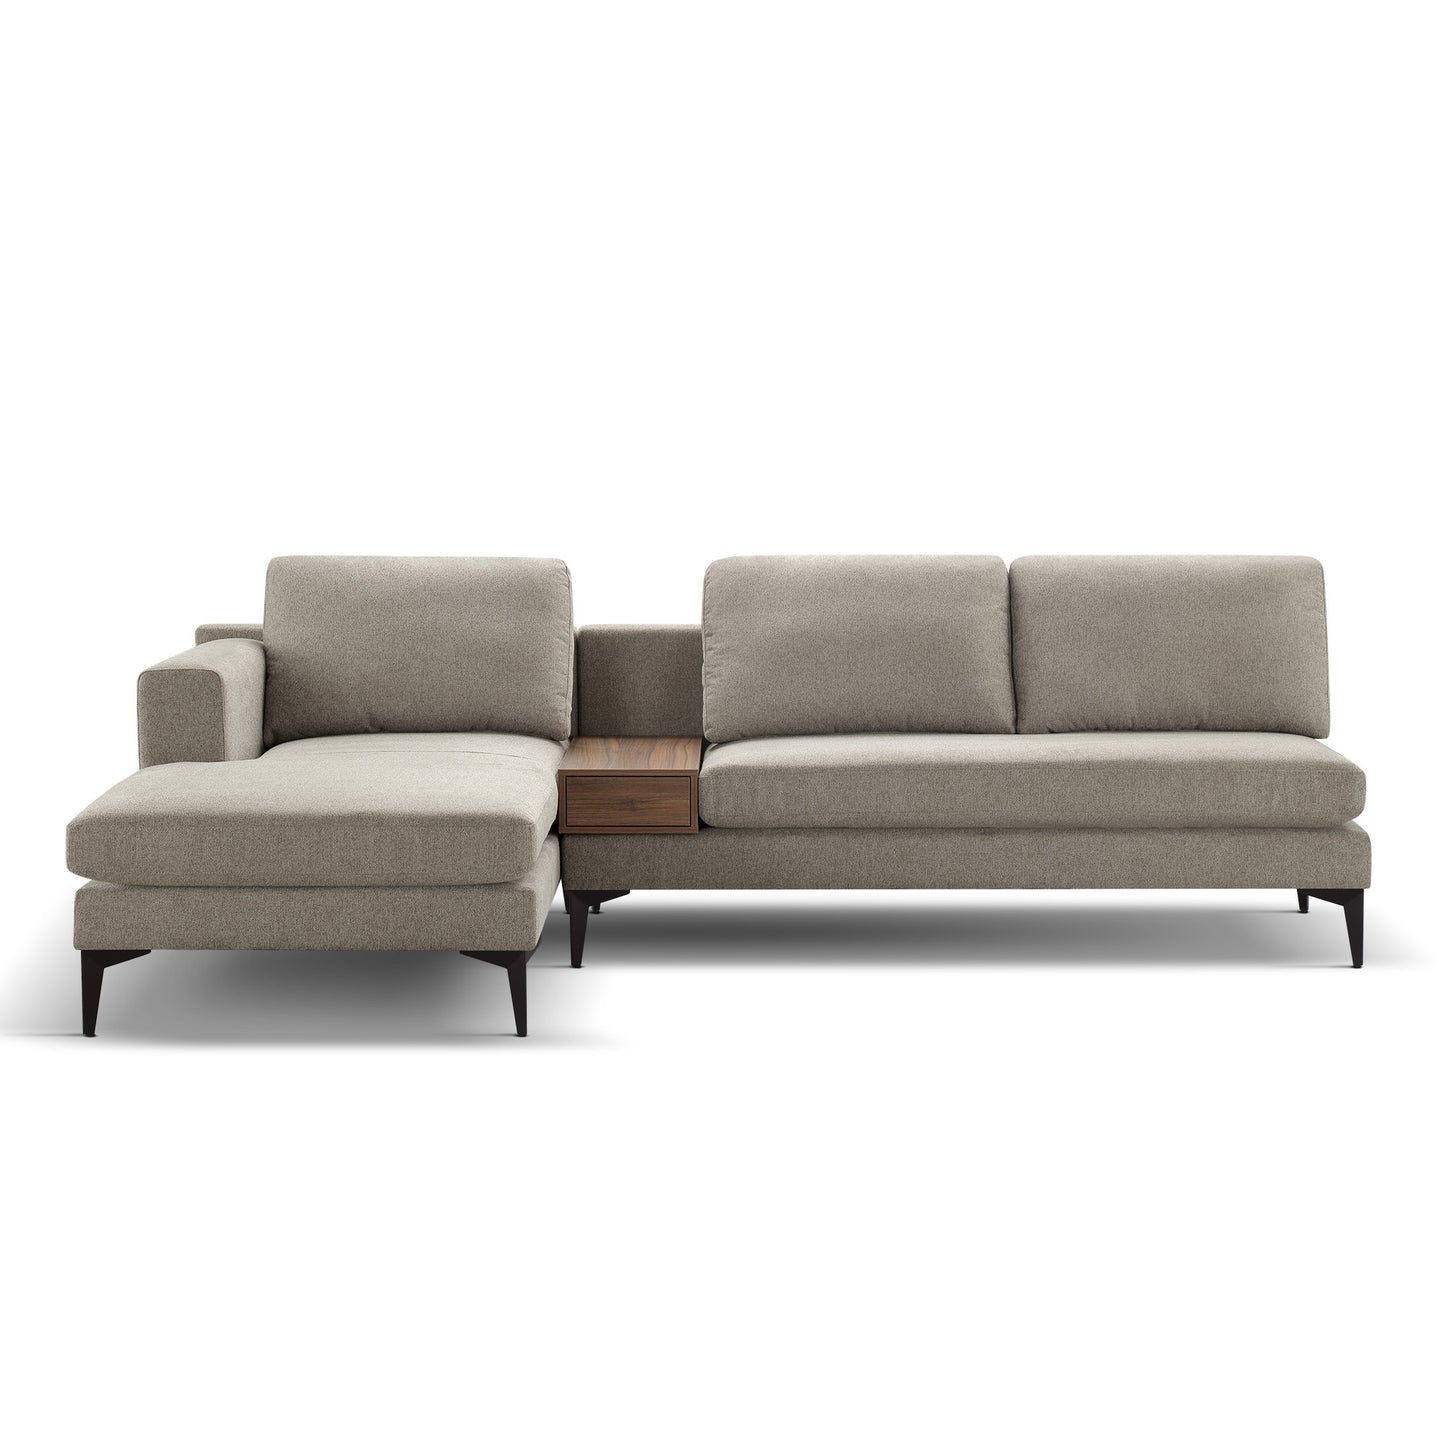 L Shape Modern Sectional L Shape Couch Sofa with Reversible Chaise and Armless 2 Seater Loveseat , 2 Piece Free Combination Sectional Couch with Left or Right Arm Facing Chaise, Texture Sand